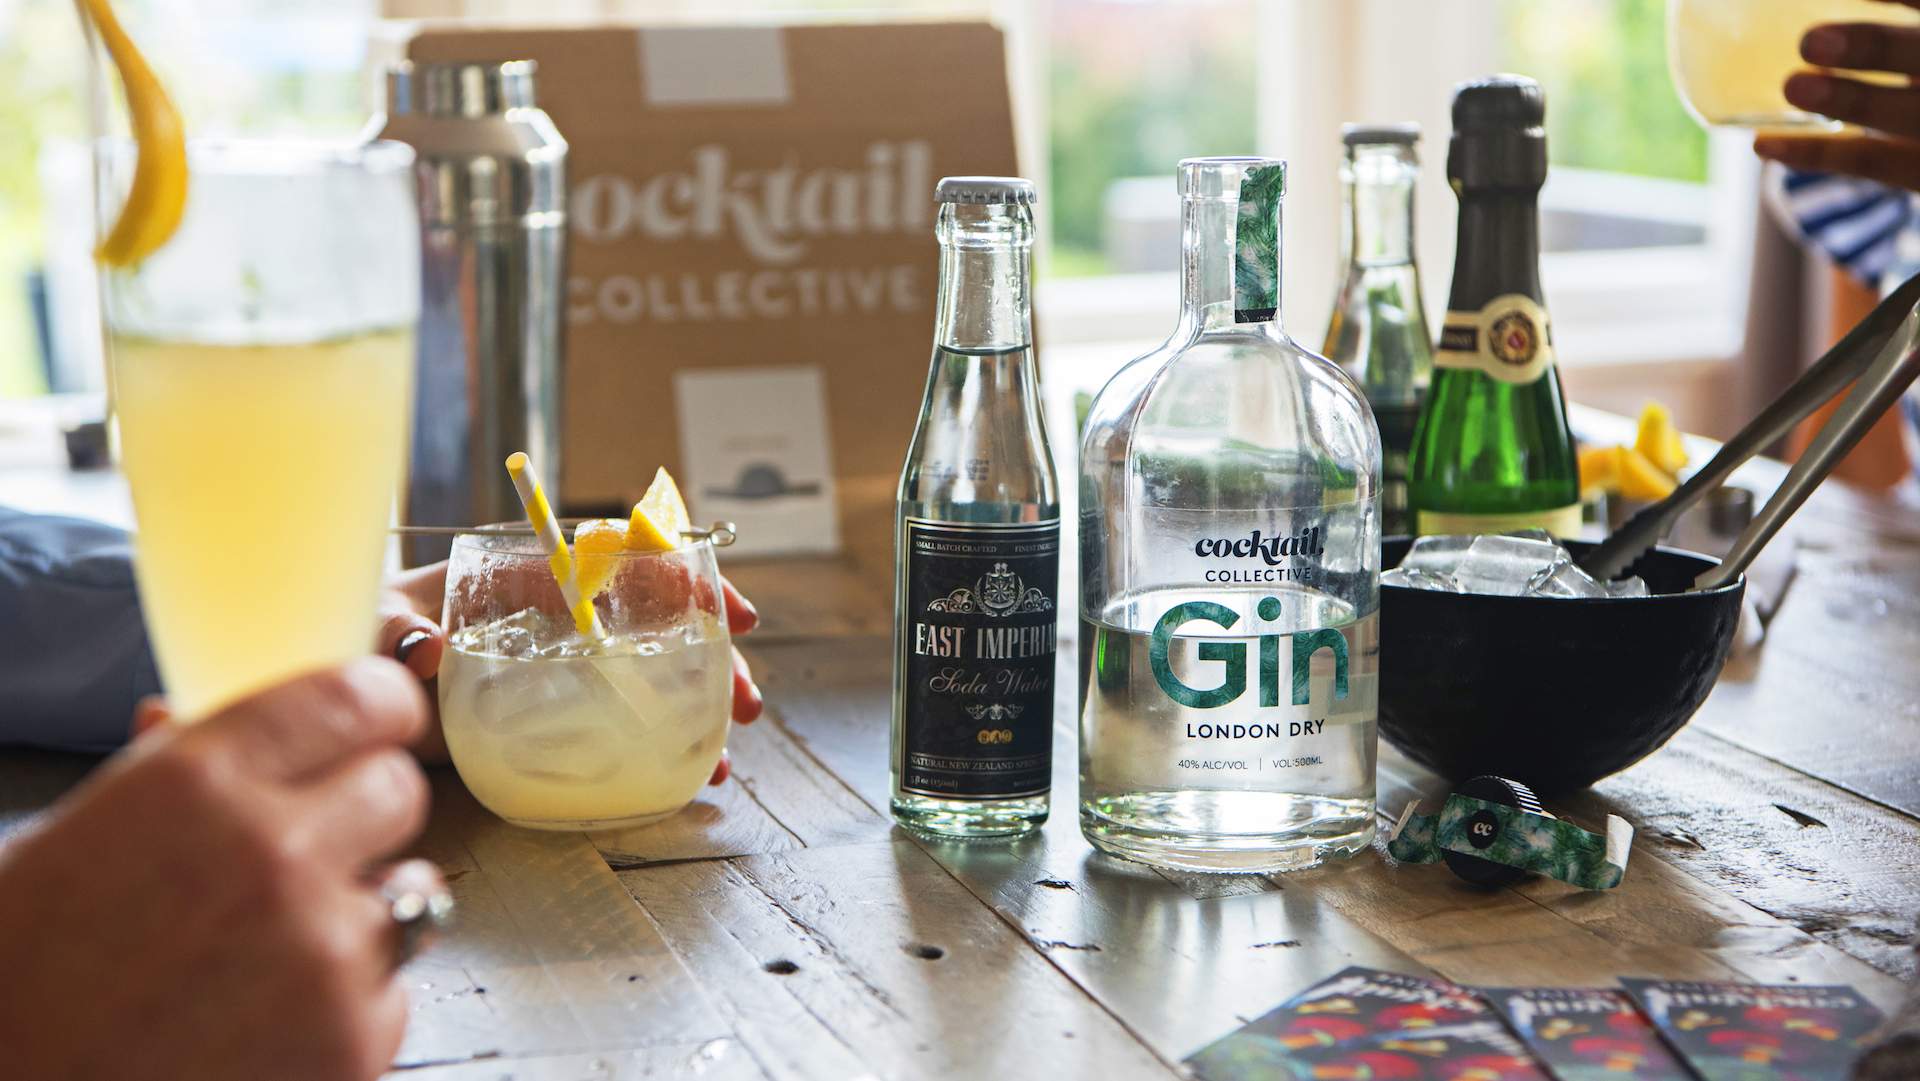 A Cocktail Delivery Service Has Launched in New Zealand